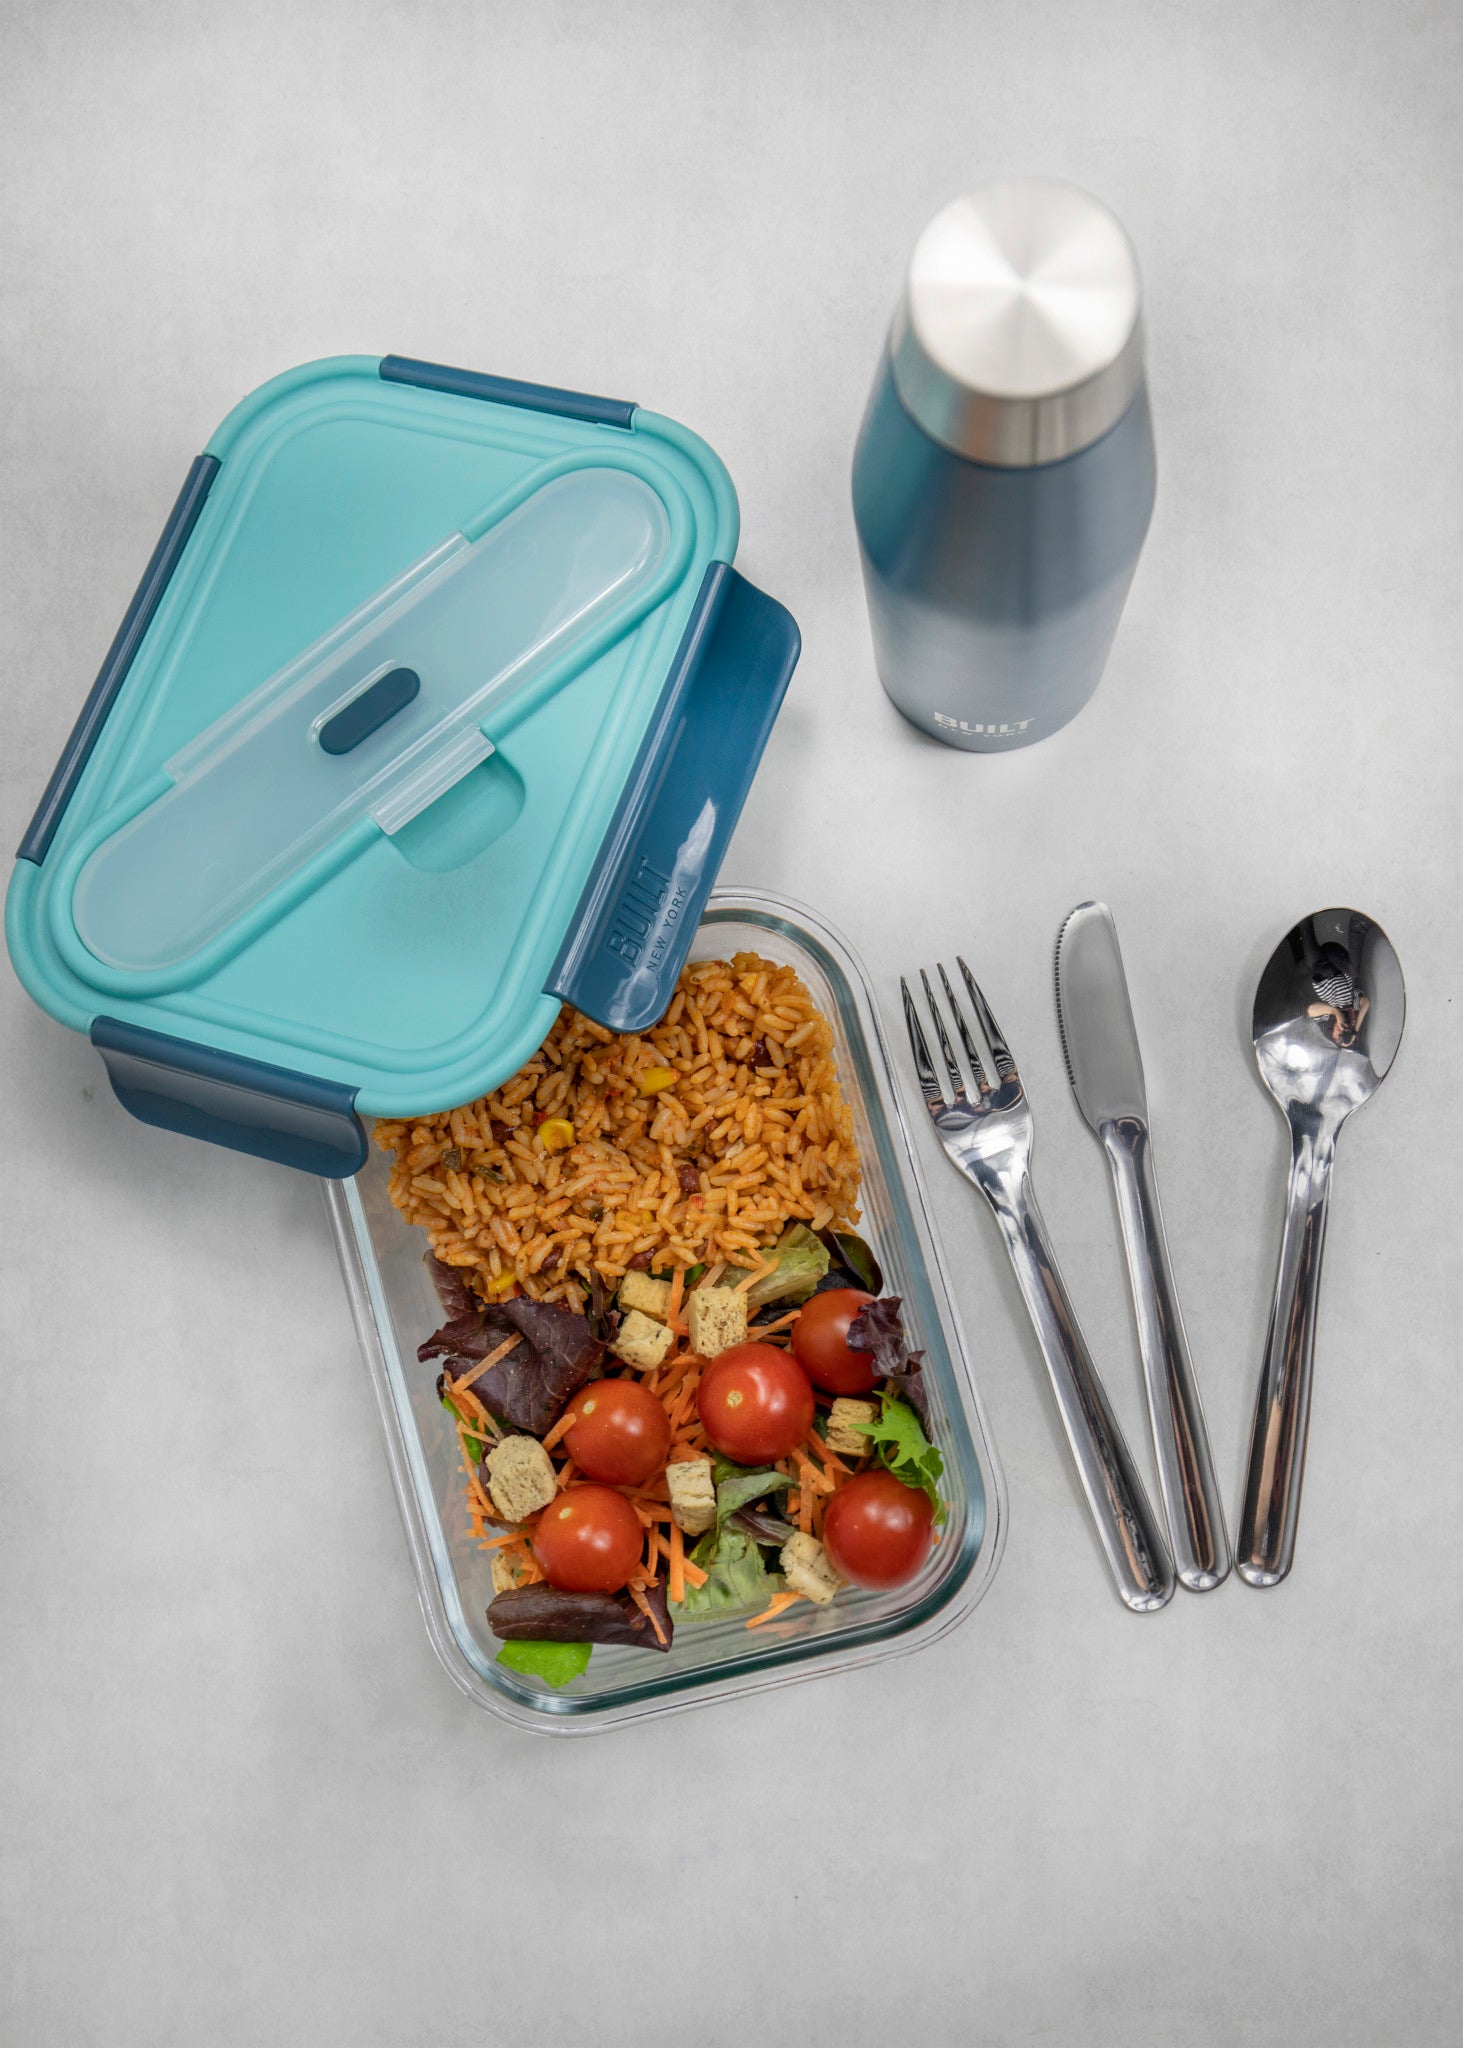 Built Glass Lunch Box With Utensils 900ml Cutlery Food Travel